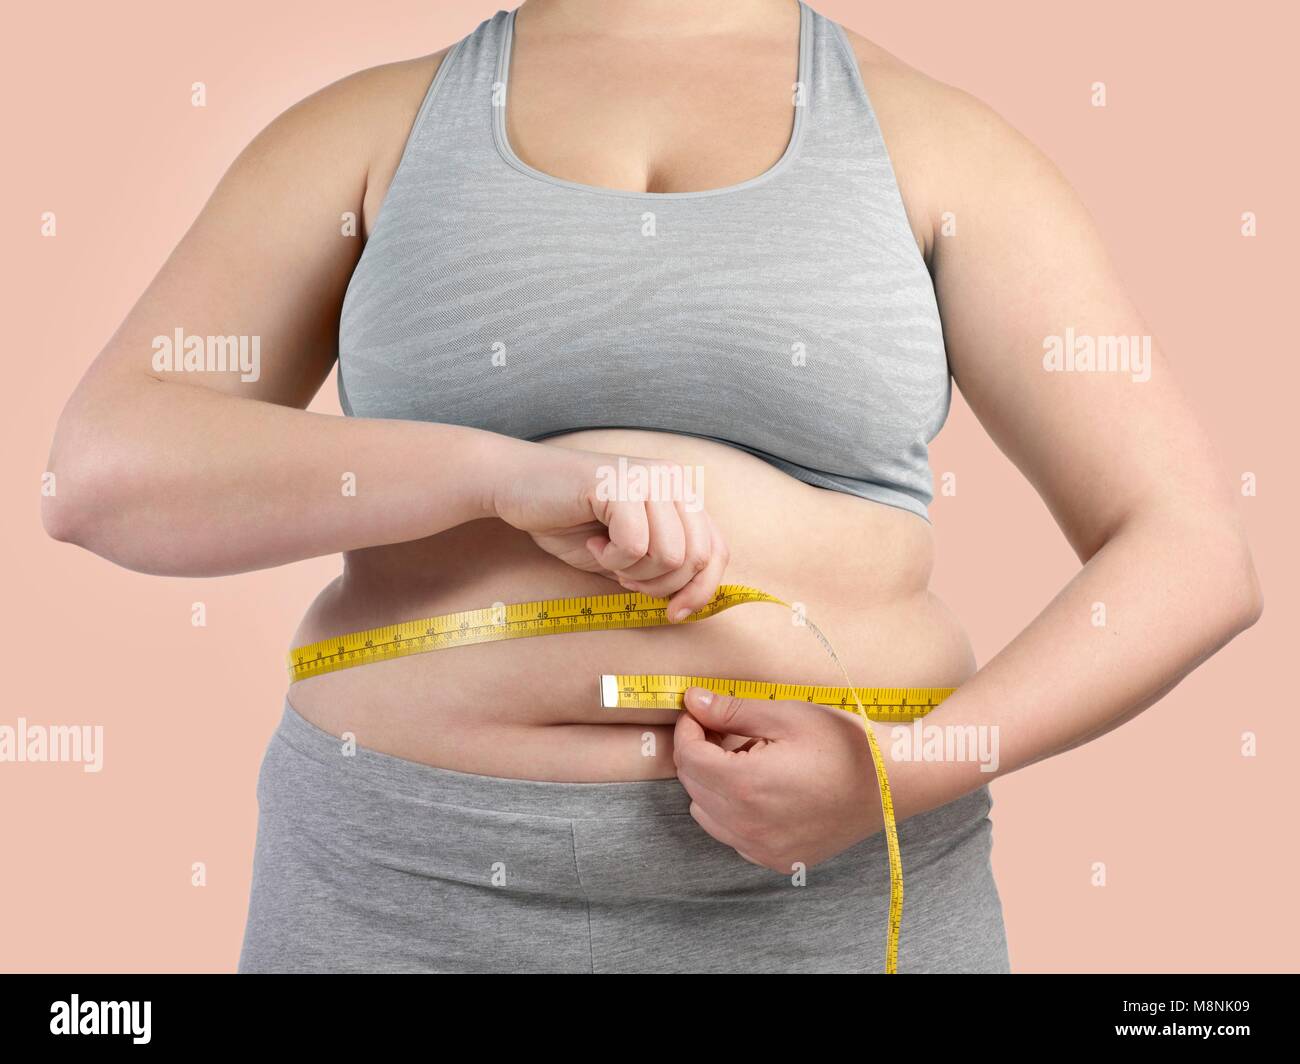 https://c8.alamy.com/comp/M8NK09/overweight-woman-measuring-her-waist-with-a-tape-measure-M8NK09.jpg